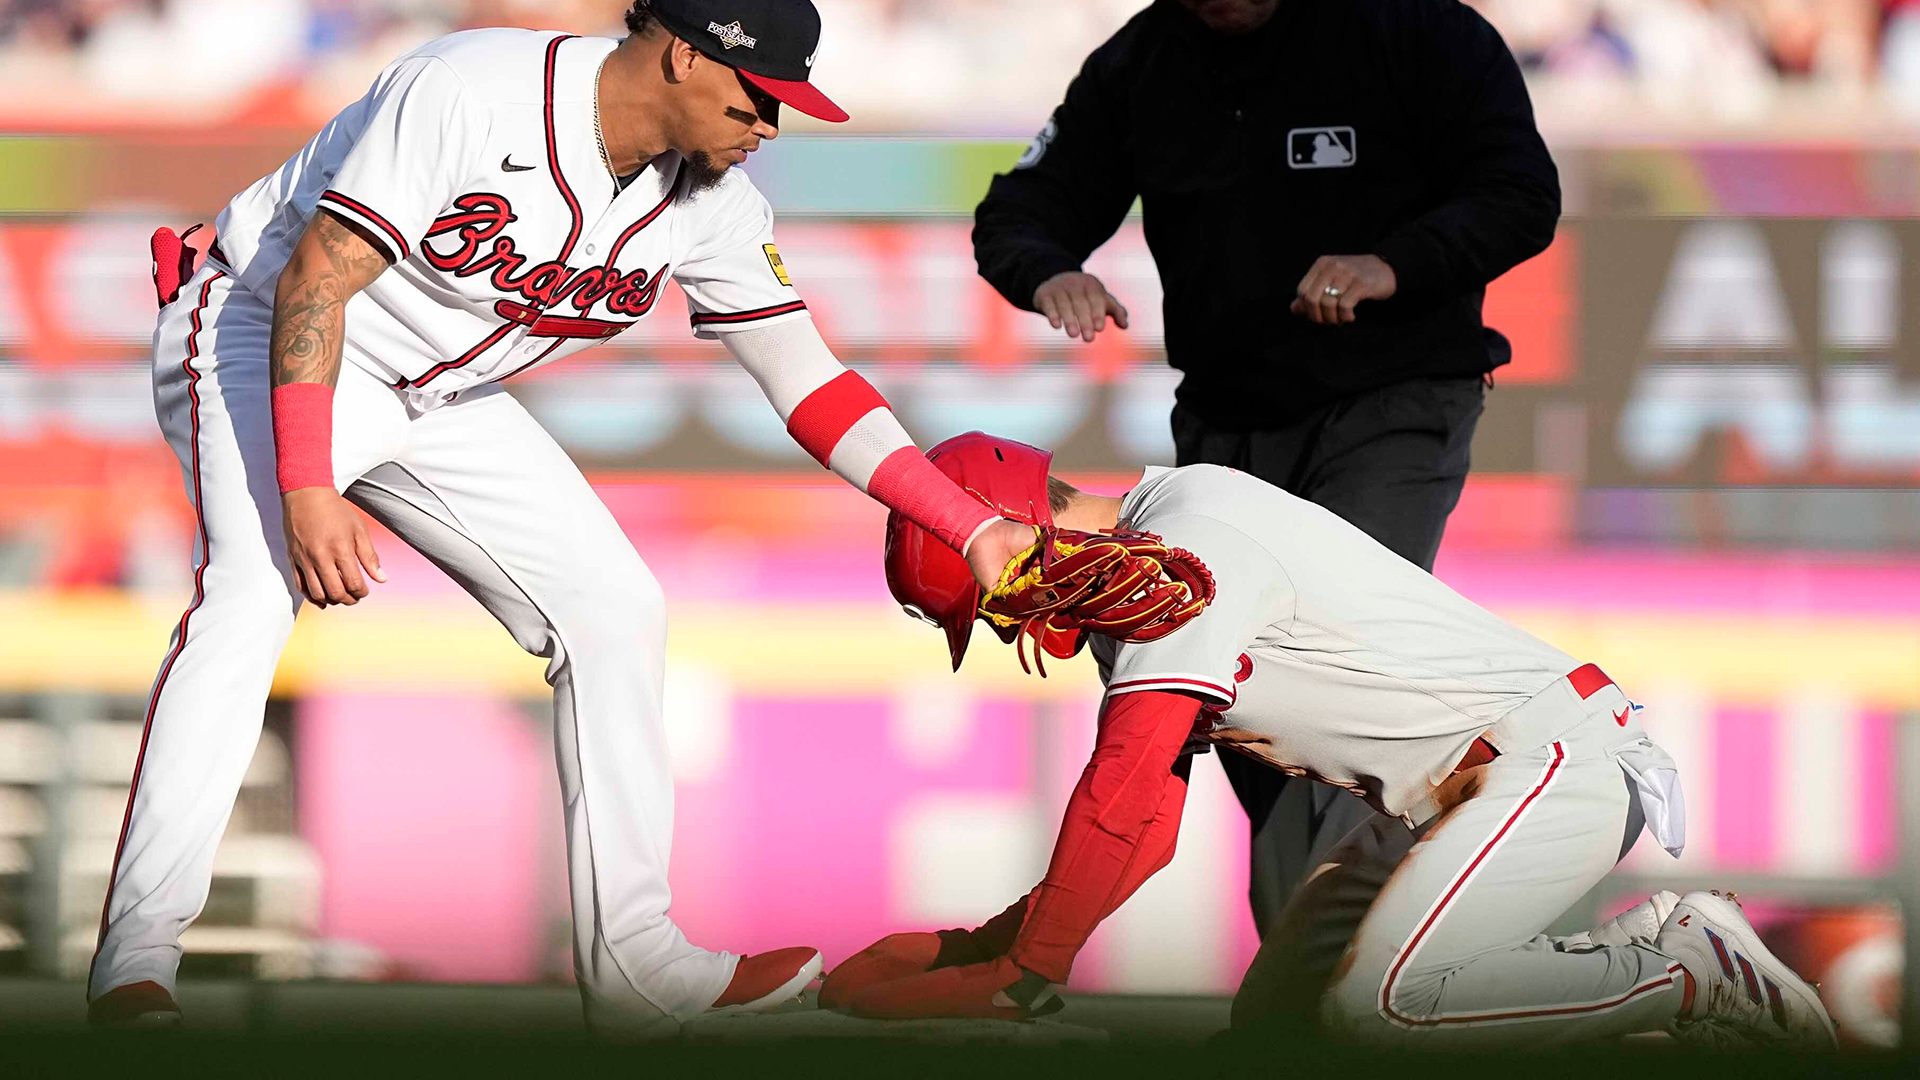 Trea Turner kneels with his hands on second base after stealing the bag